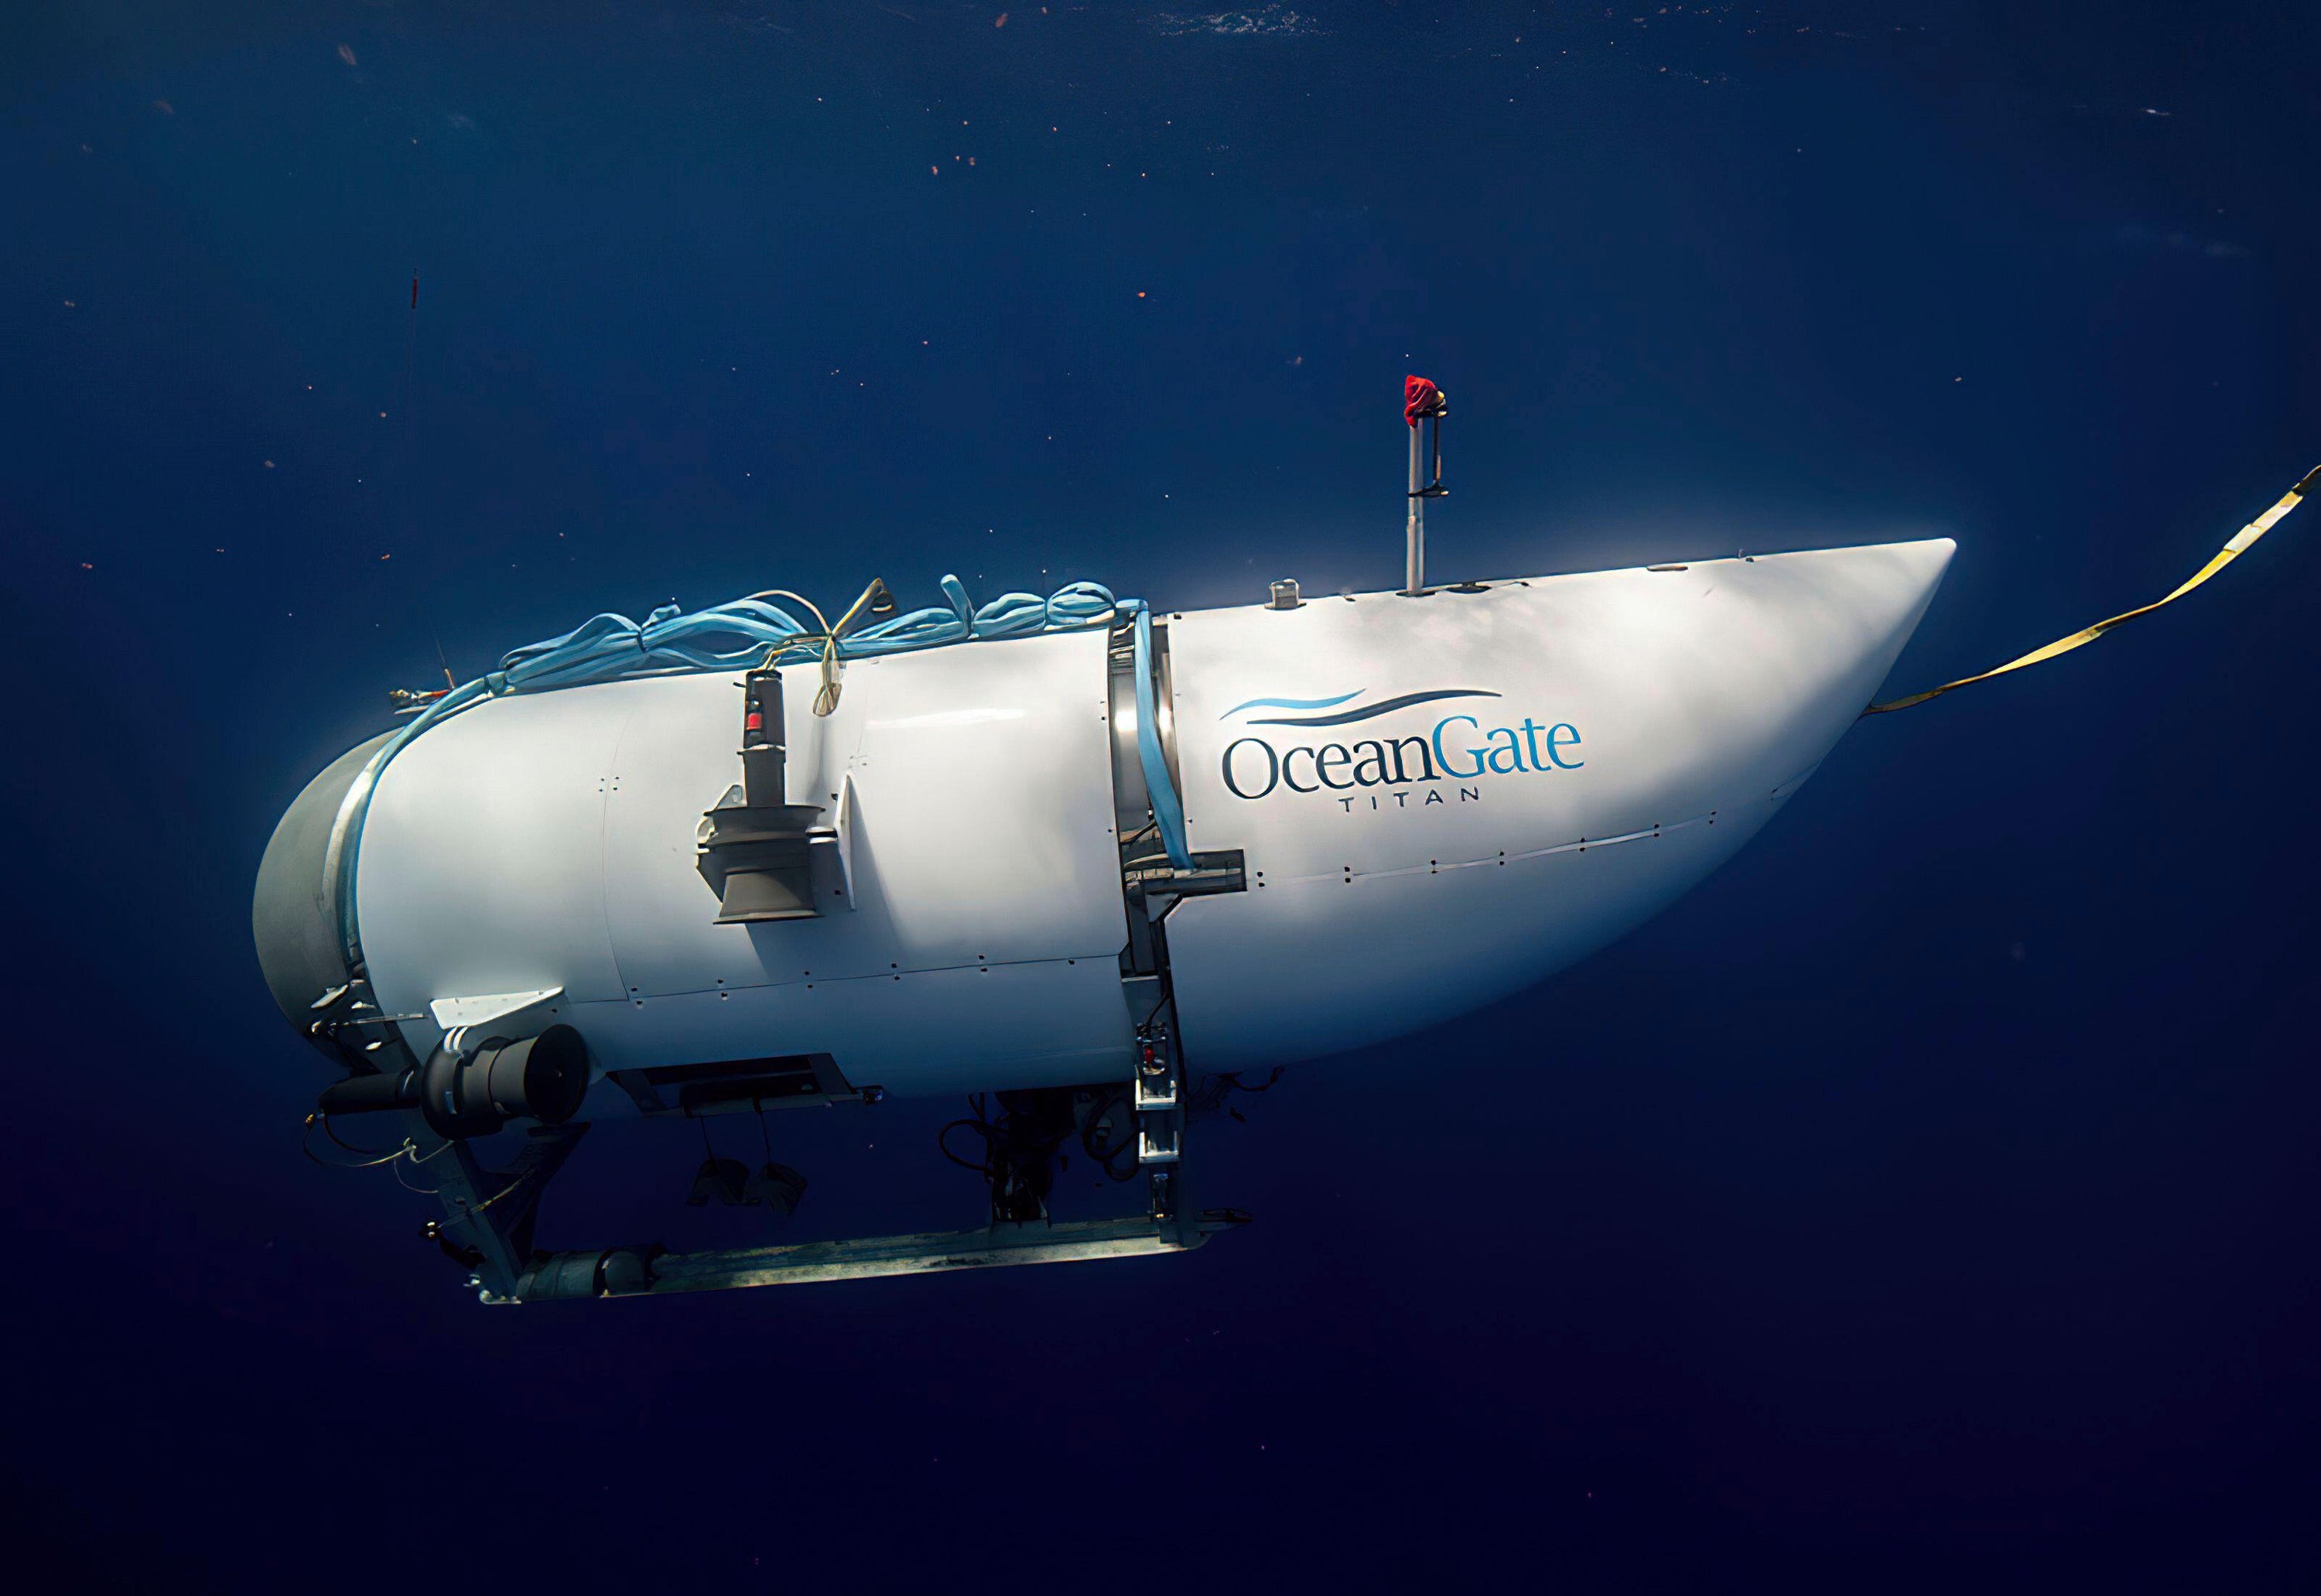 OceanGate Expeditions’ Titan submersible which imploded, killing all five passengers